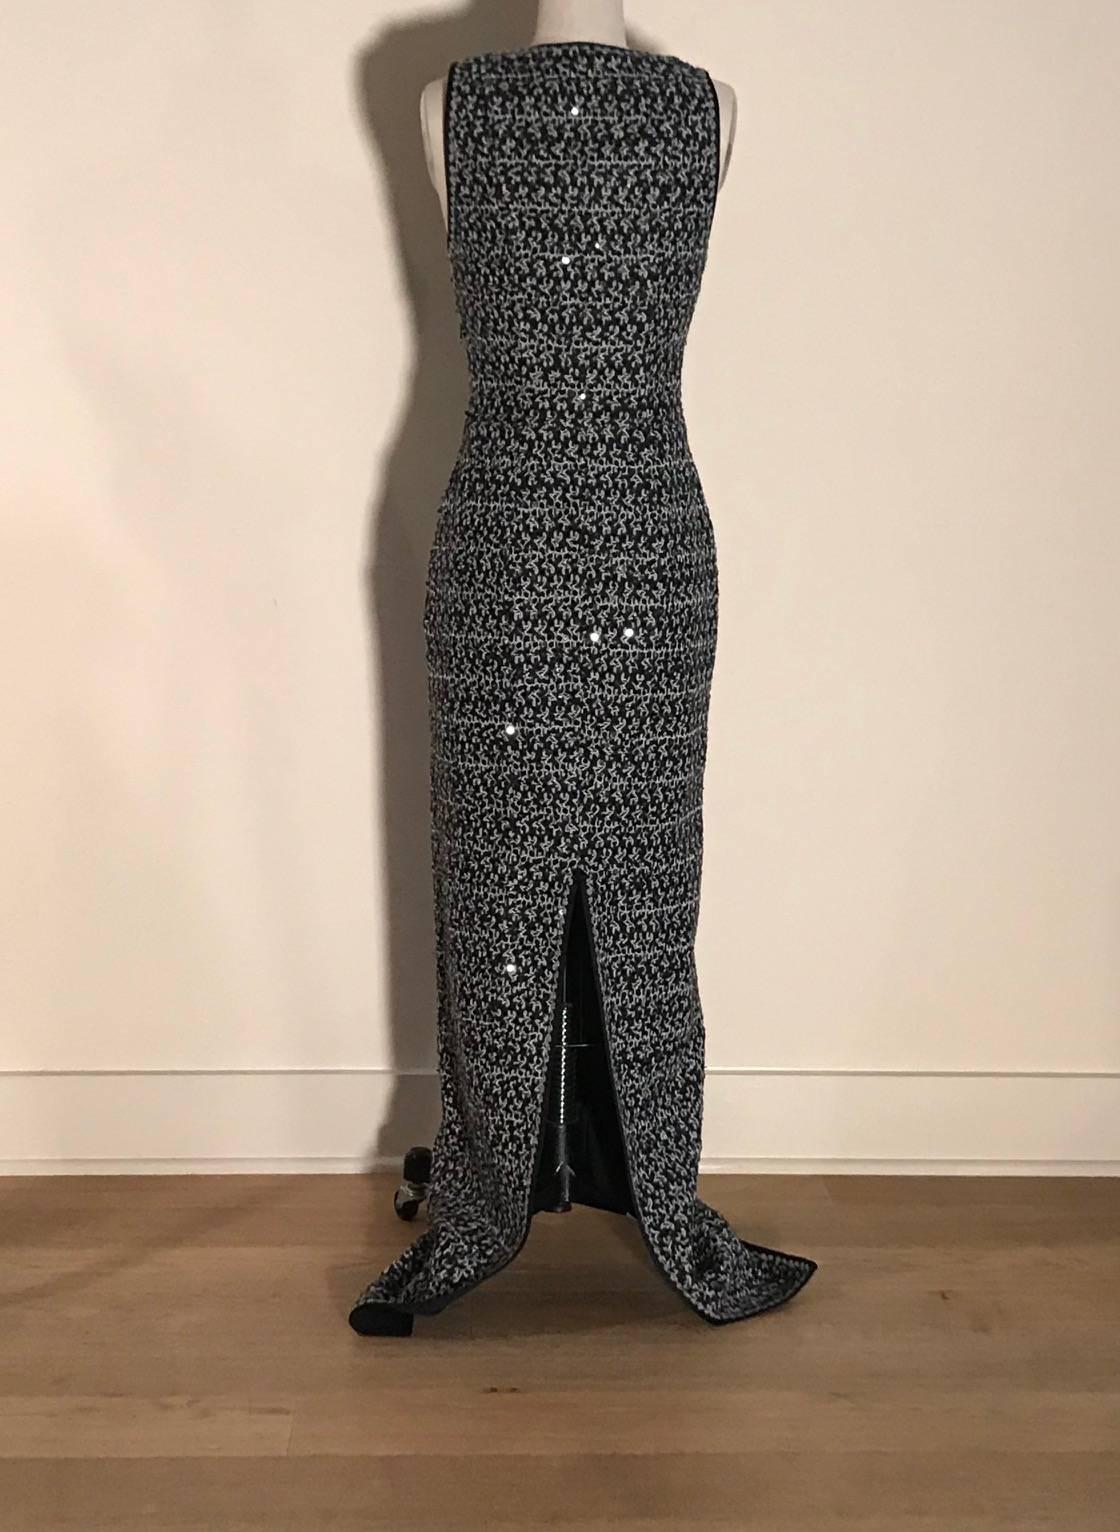 Missoni black and white knit maxi dress with black sequin accents throughout. Curved v-neck. Partial side zip. 

70% wool, 30% rayon.
Fully lined in 80% nylon, 20% elastane.

Made in Italy.

Size IT 40, seems to best fit US 2. Slightly stretchy,